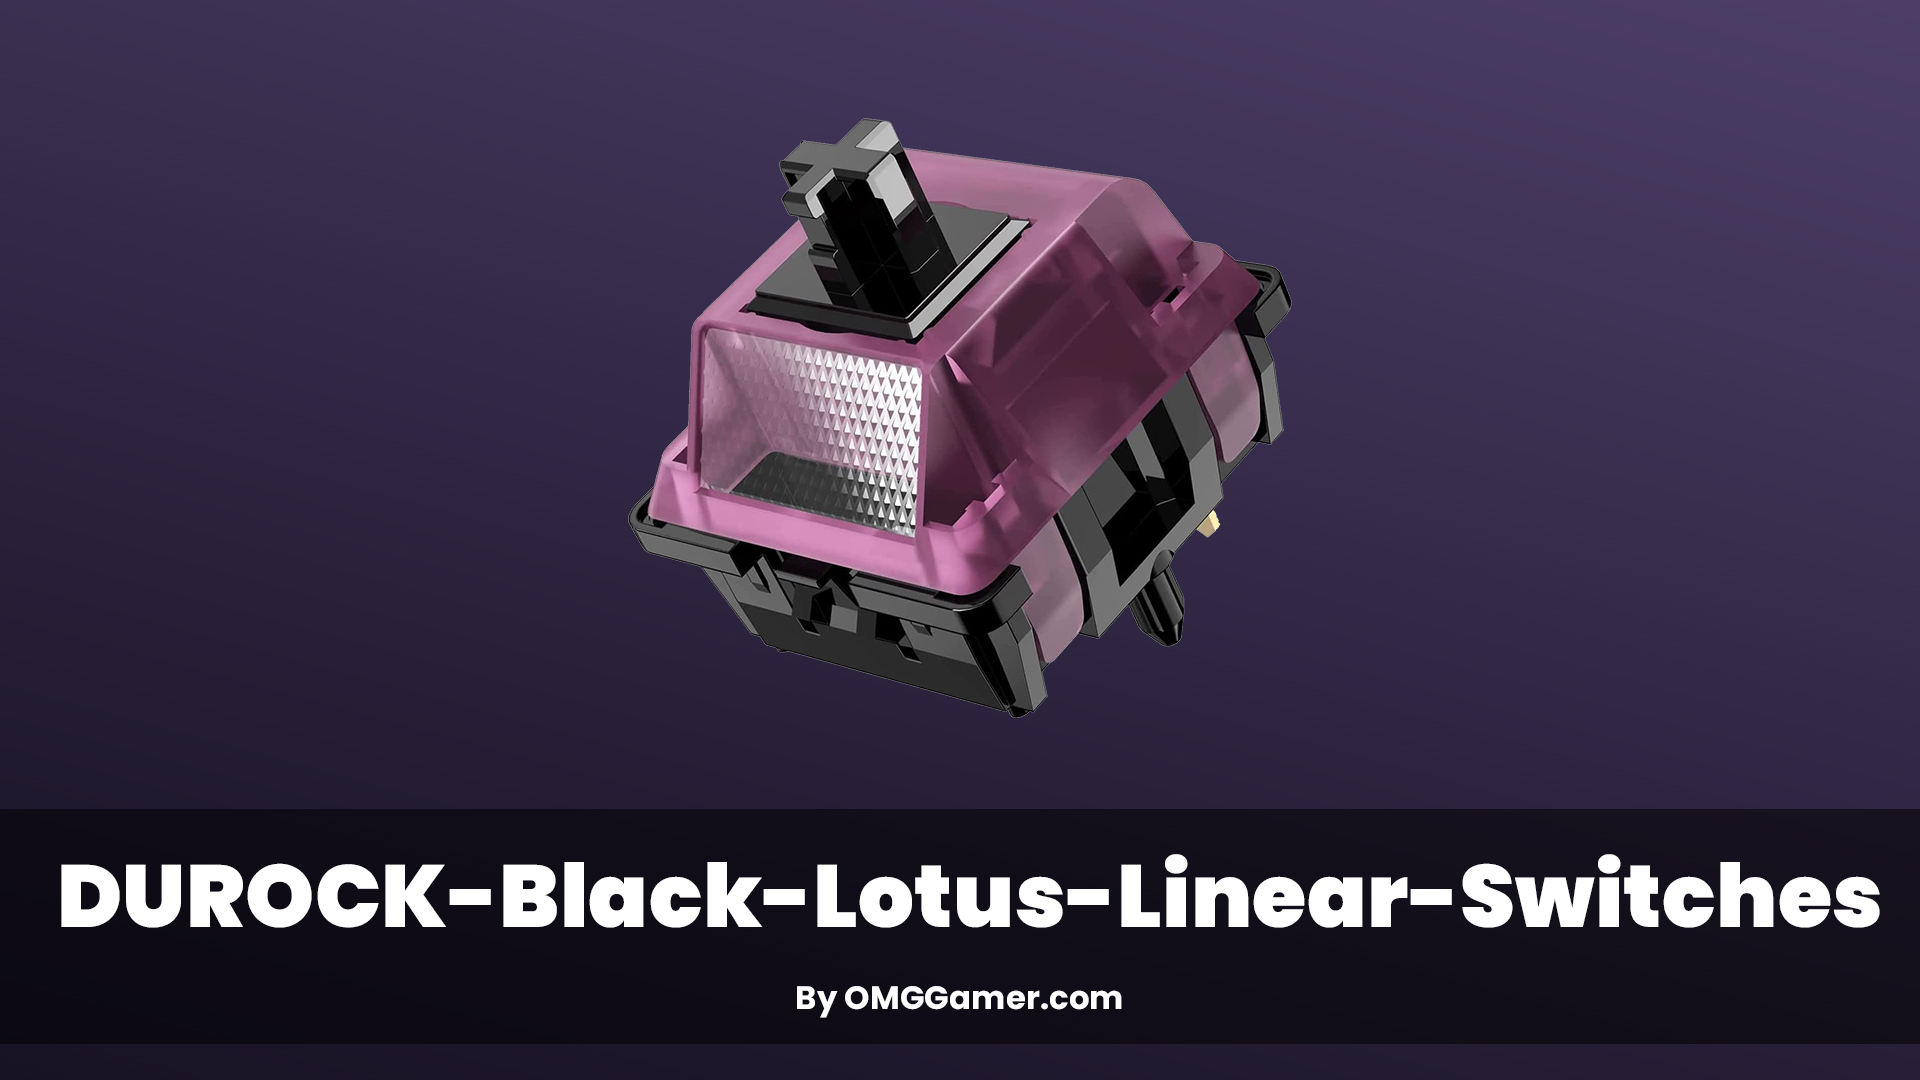 DUROCK Black Lotus Linear Switches